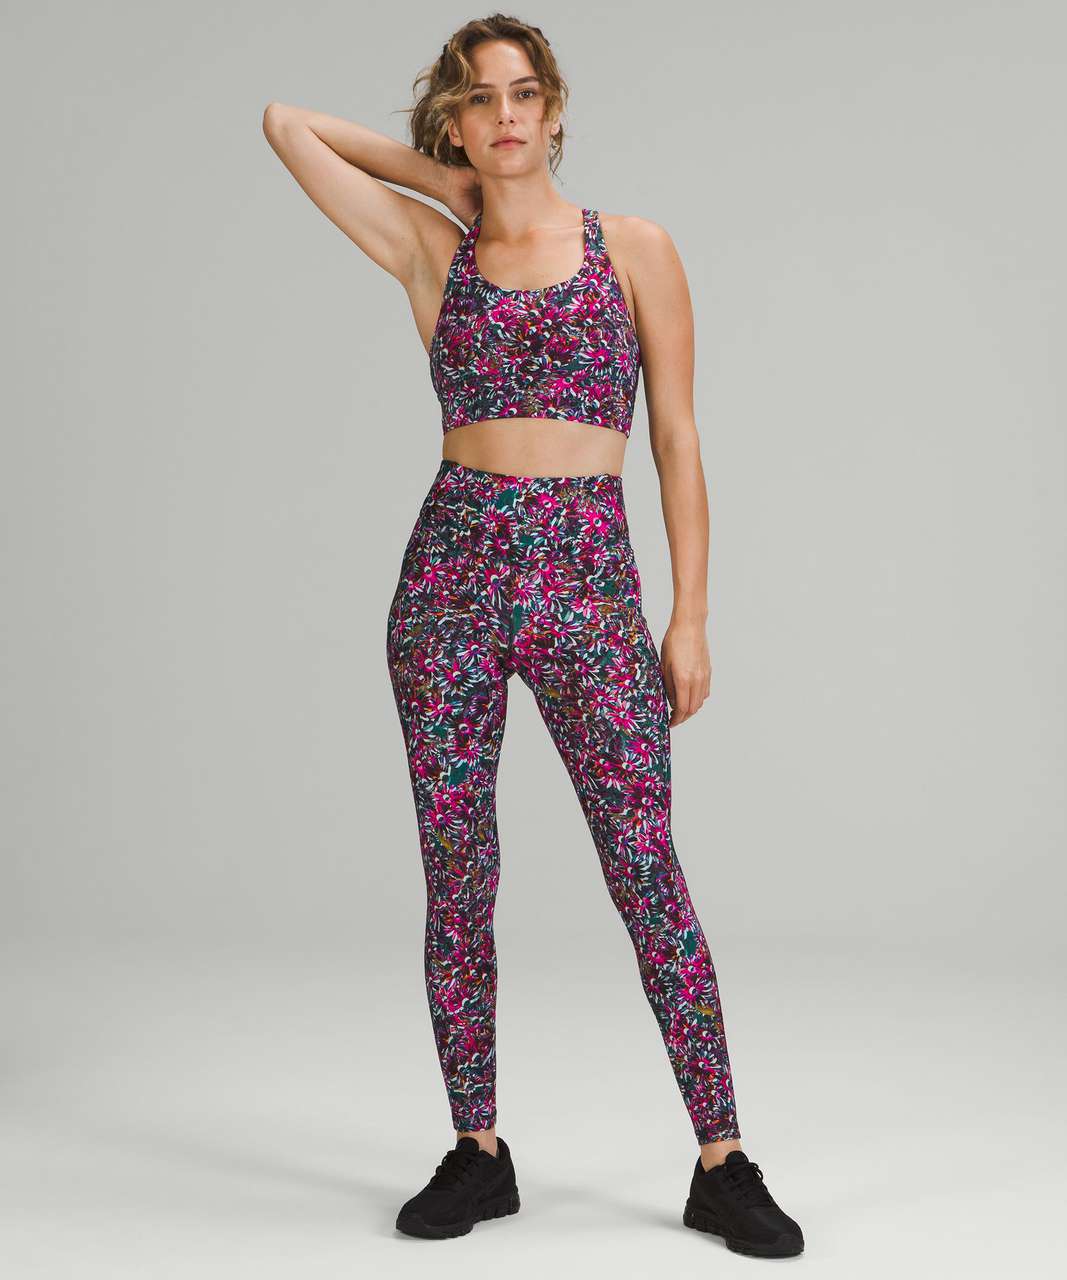 Lululemon Base Pace High-Rise Fleece Tight 28" - Floral Electric Multi